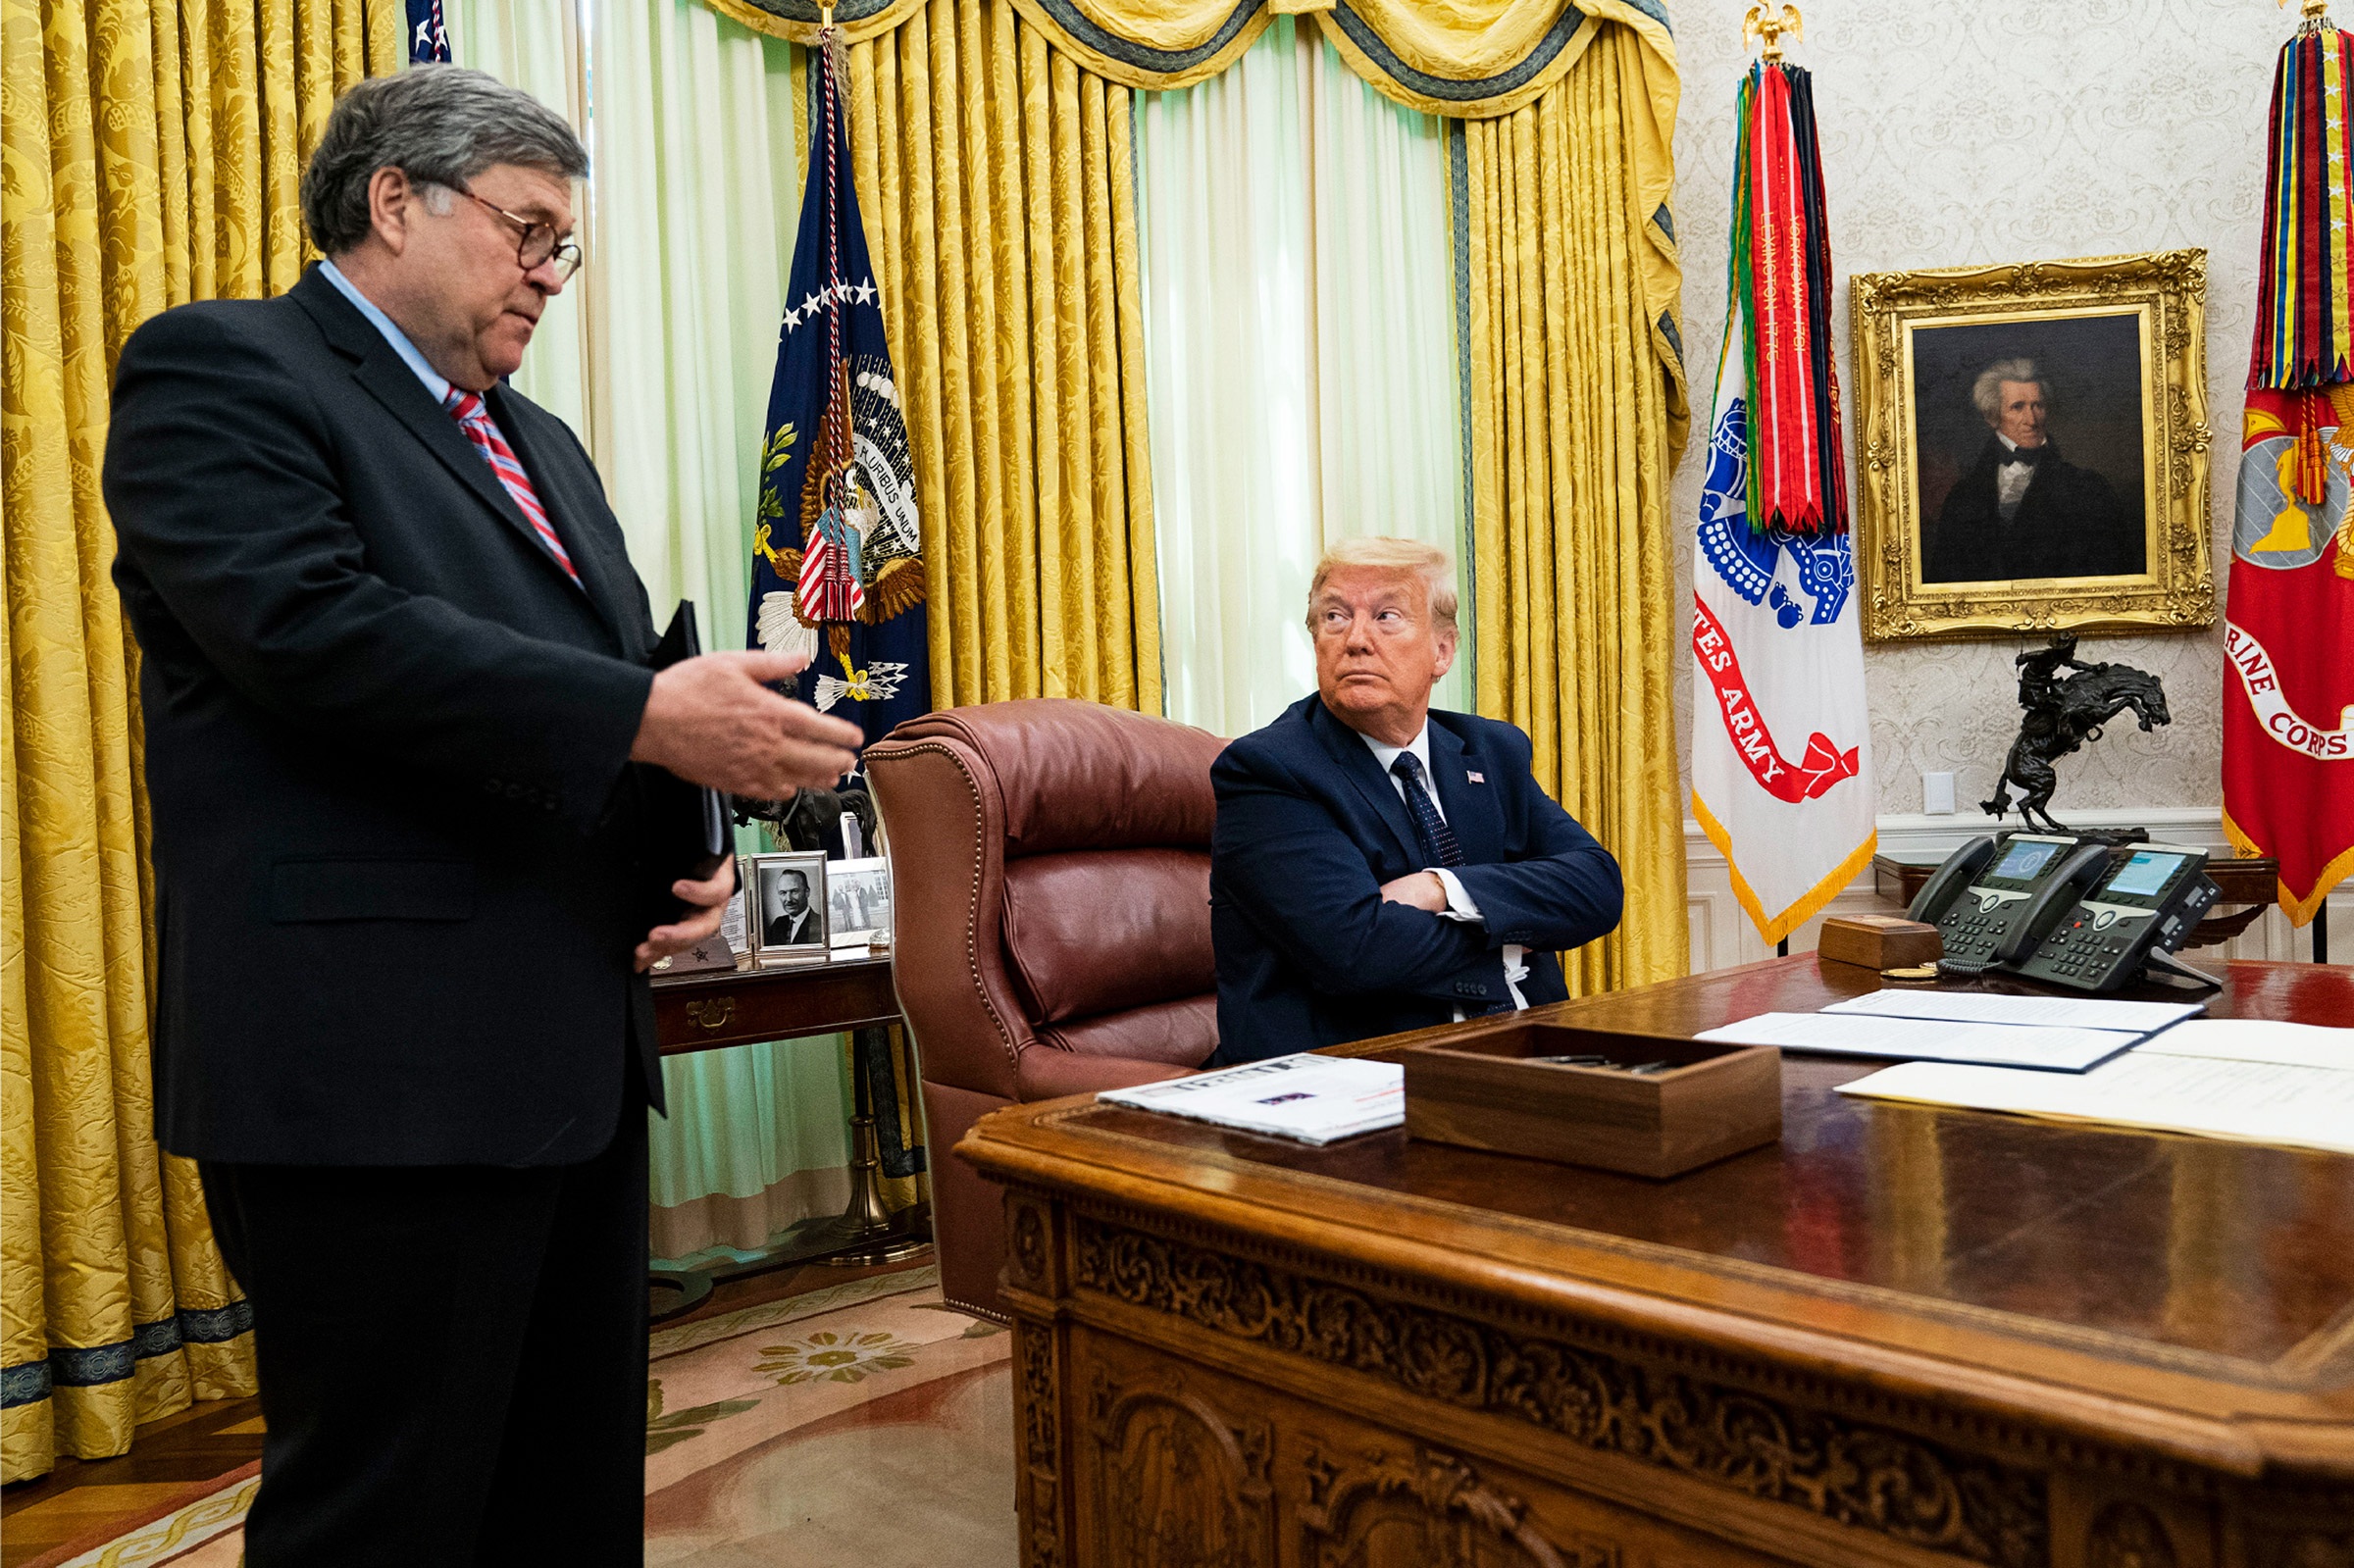 Protect Democracy has organized former Justice Department officials to speak out against Barr, left, and President Trump